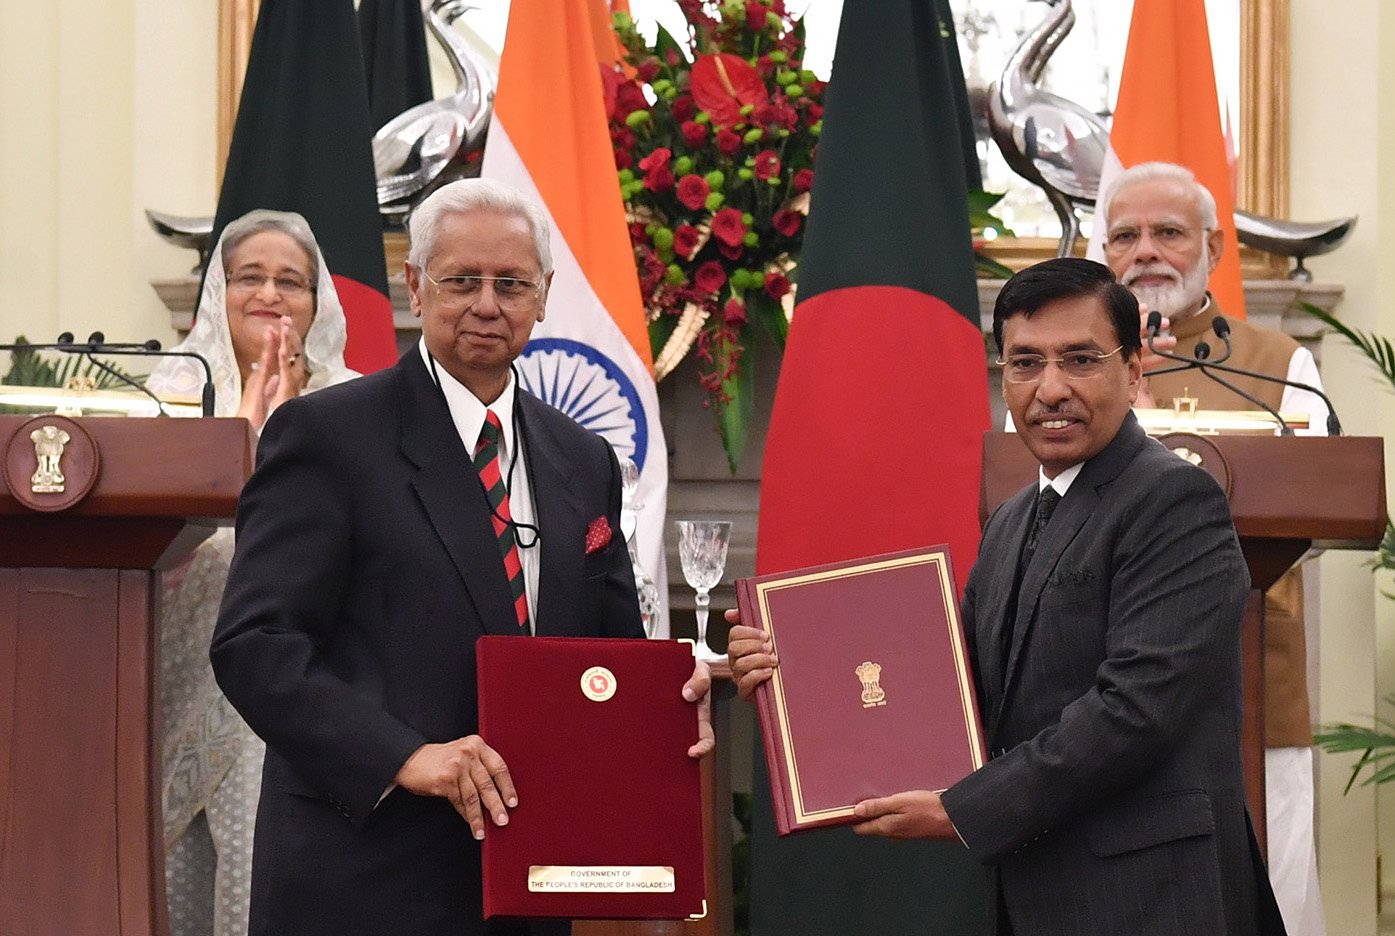 List of MoUs/Agreements exchanged during Official Visit of PM of Bangladesh to India